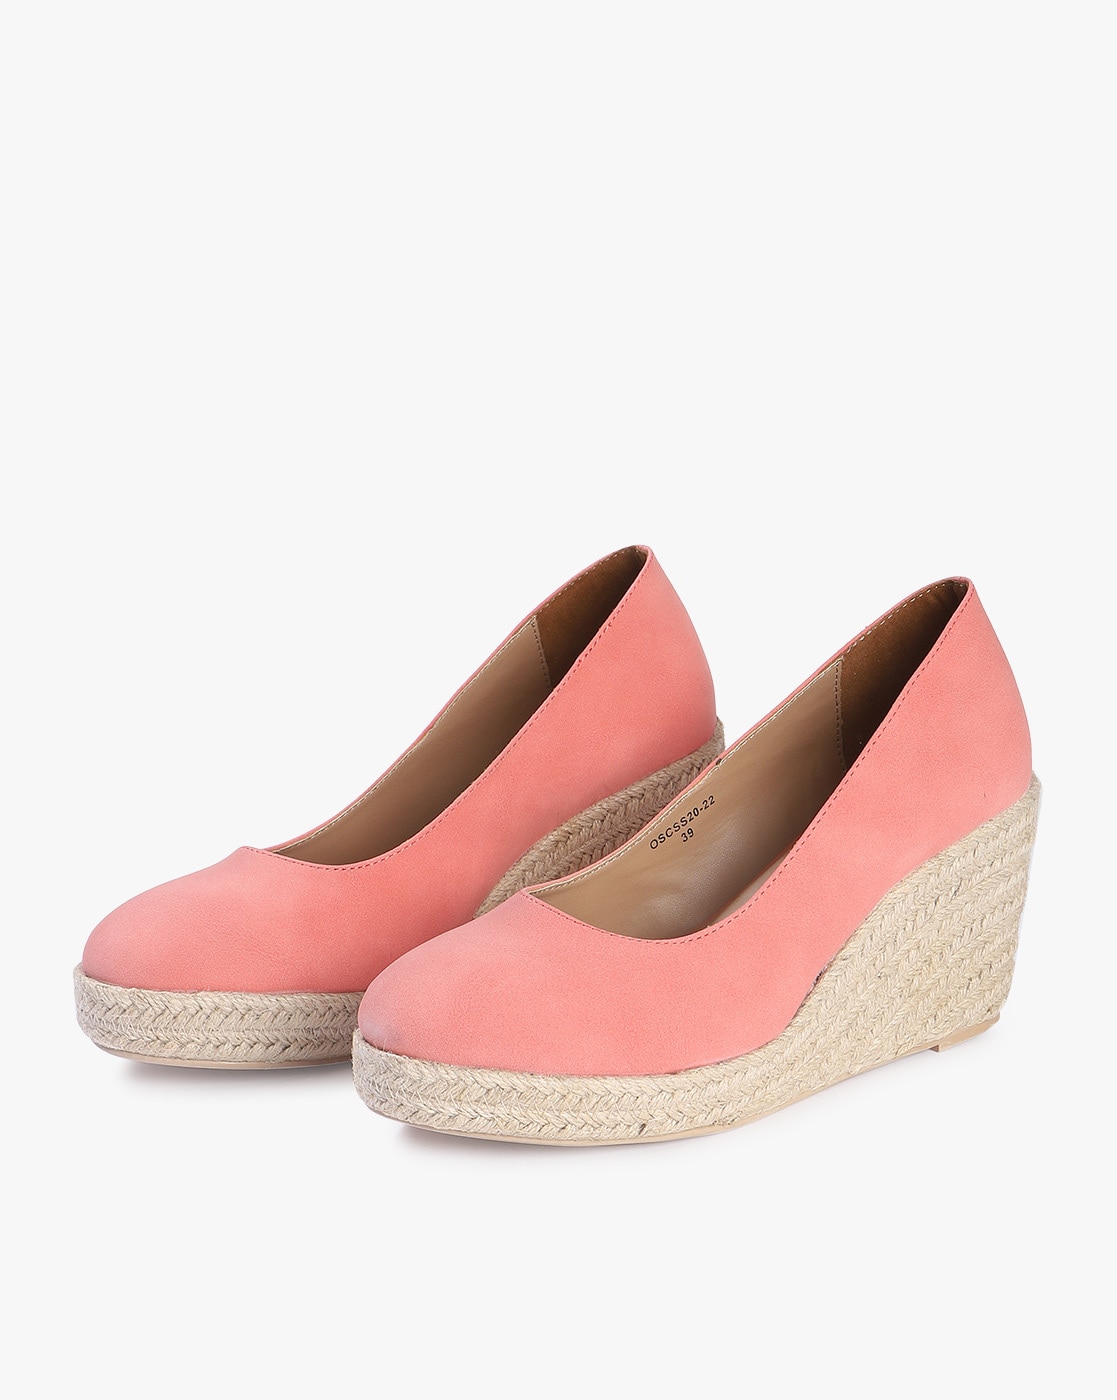 Buy Pink Shoes for Women by Outryt | Ajio.com